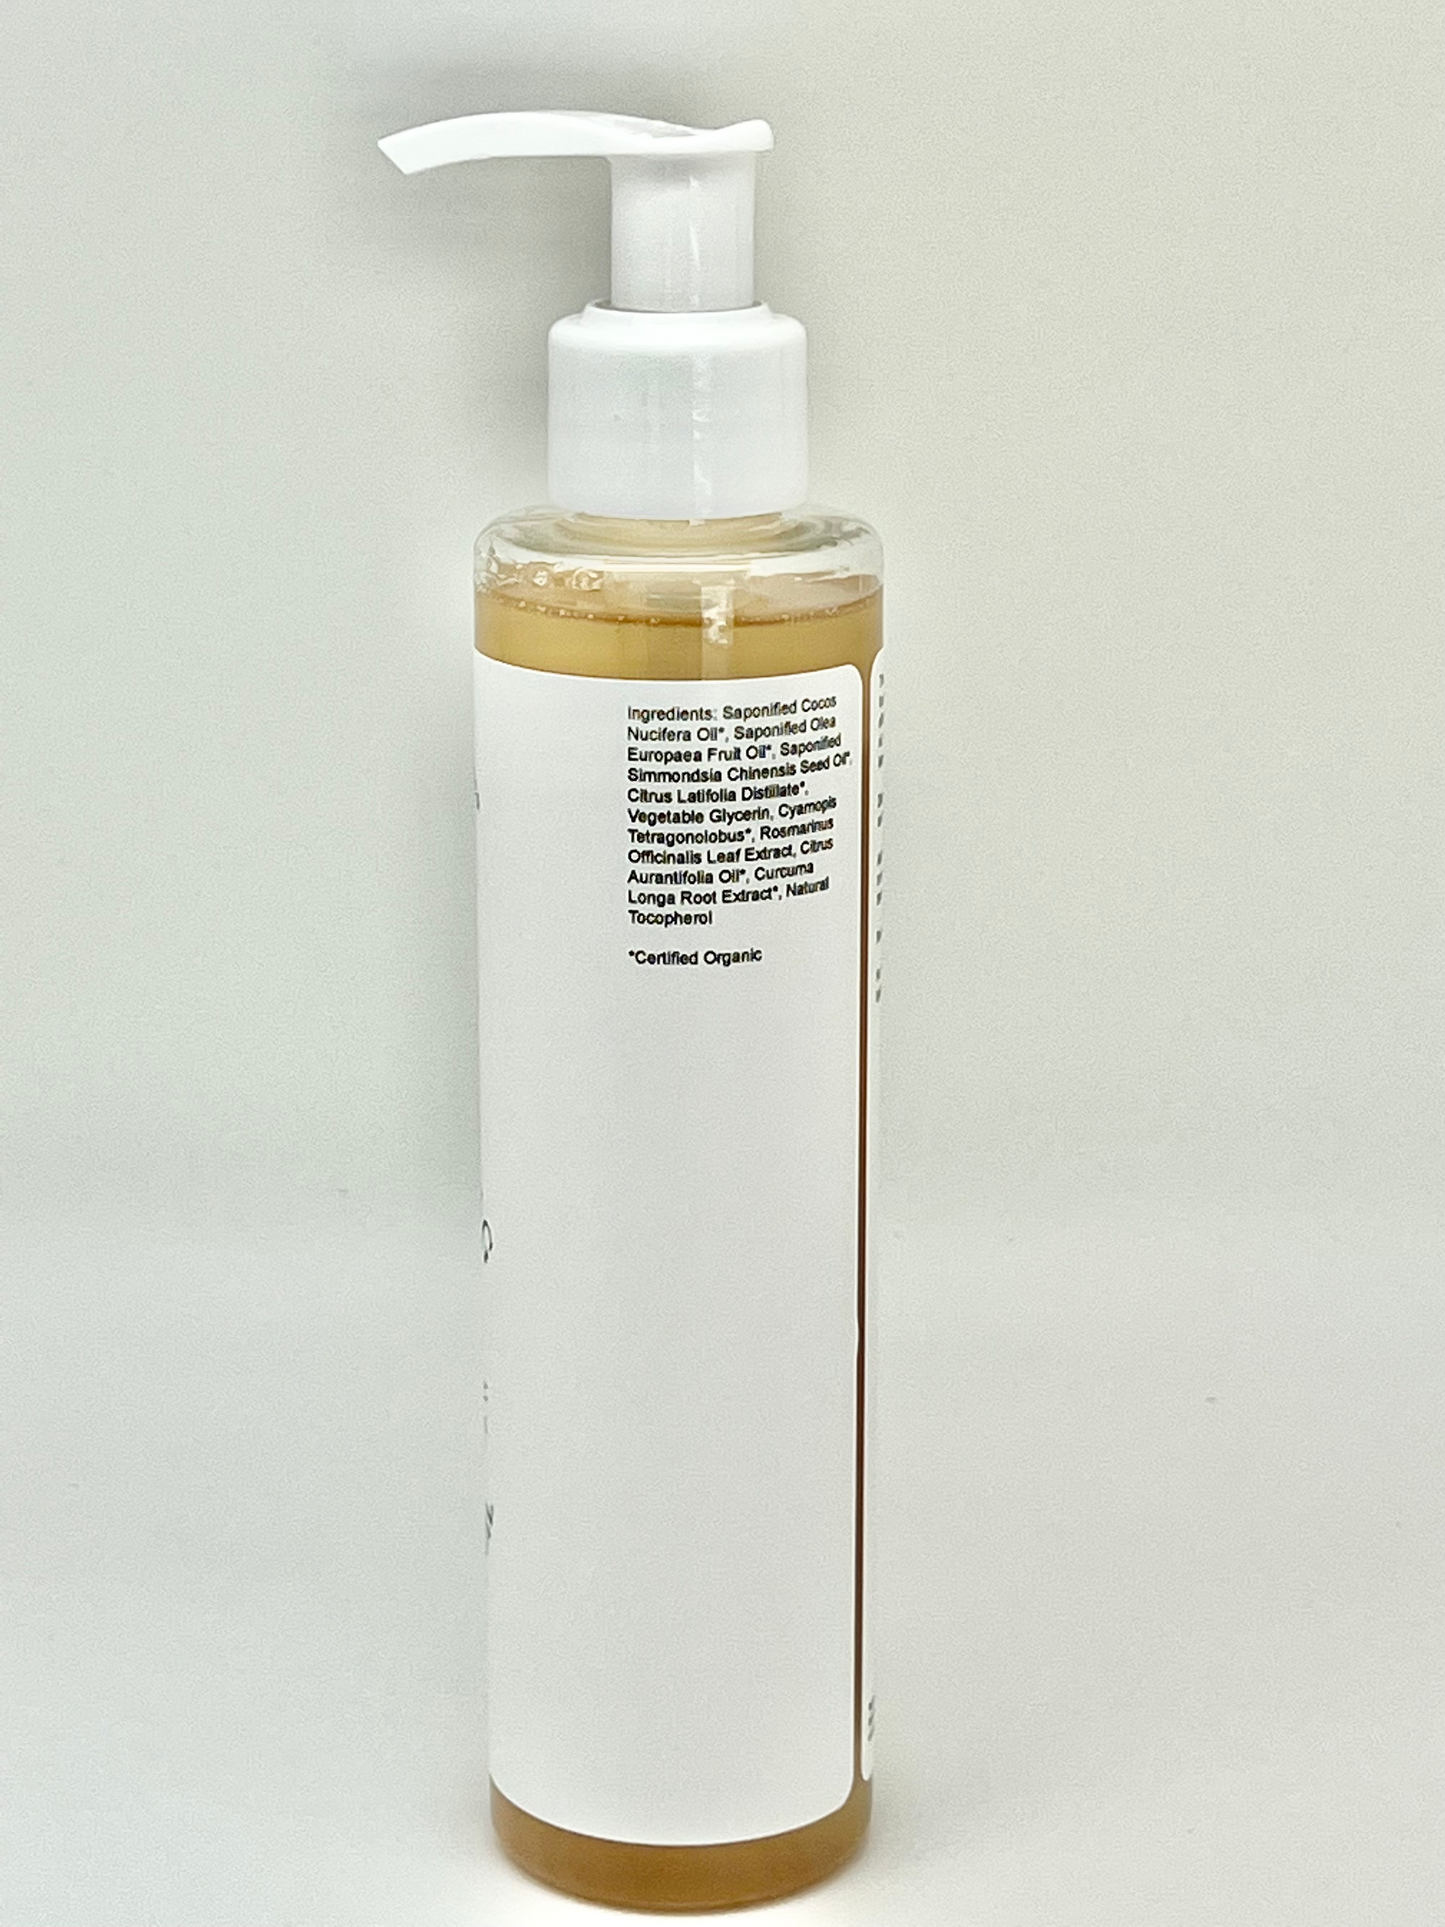 Foaming Cleansing Oil -Apothecary Botanica - Go See Christy Beauty 